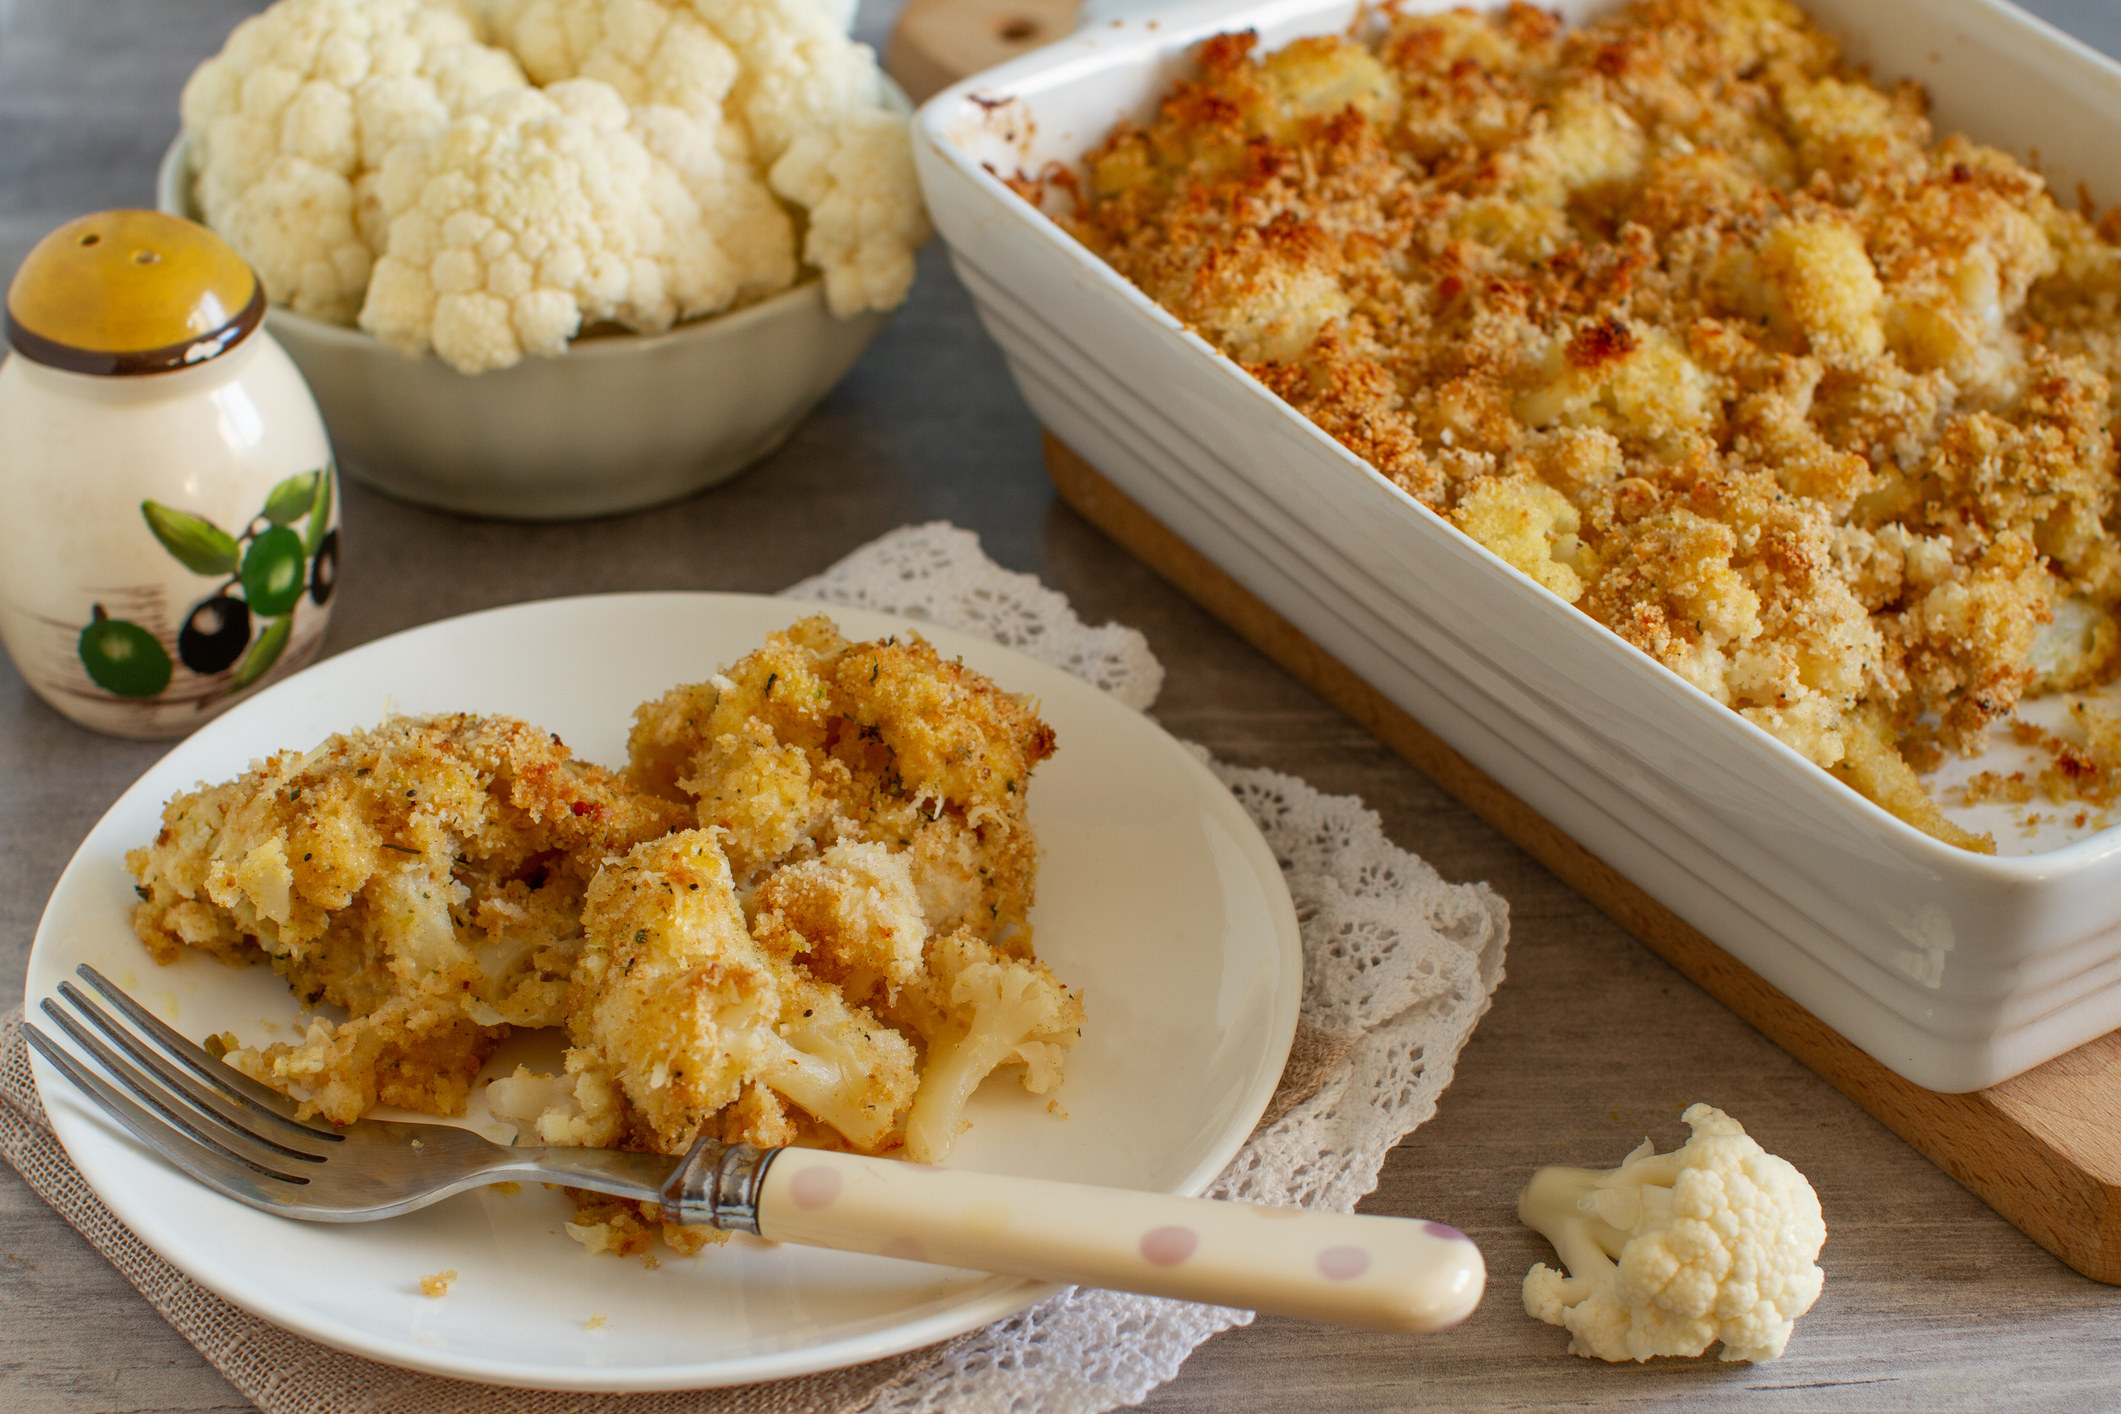 Roasted cauliflower with turmeric, peppers and breadcrumbs on a table